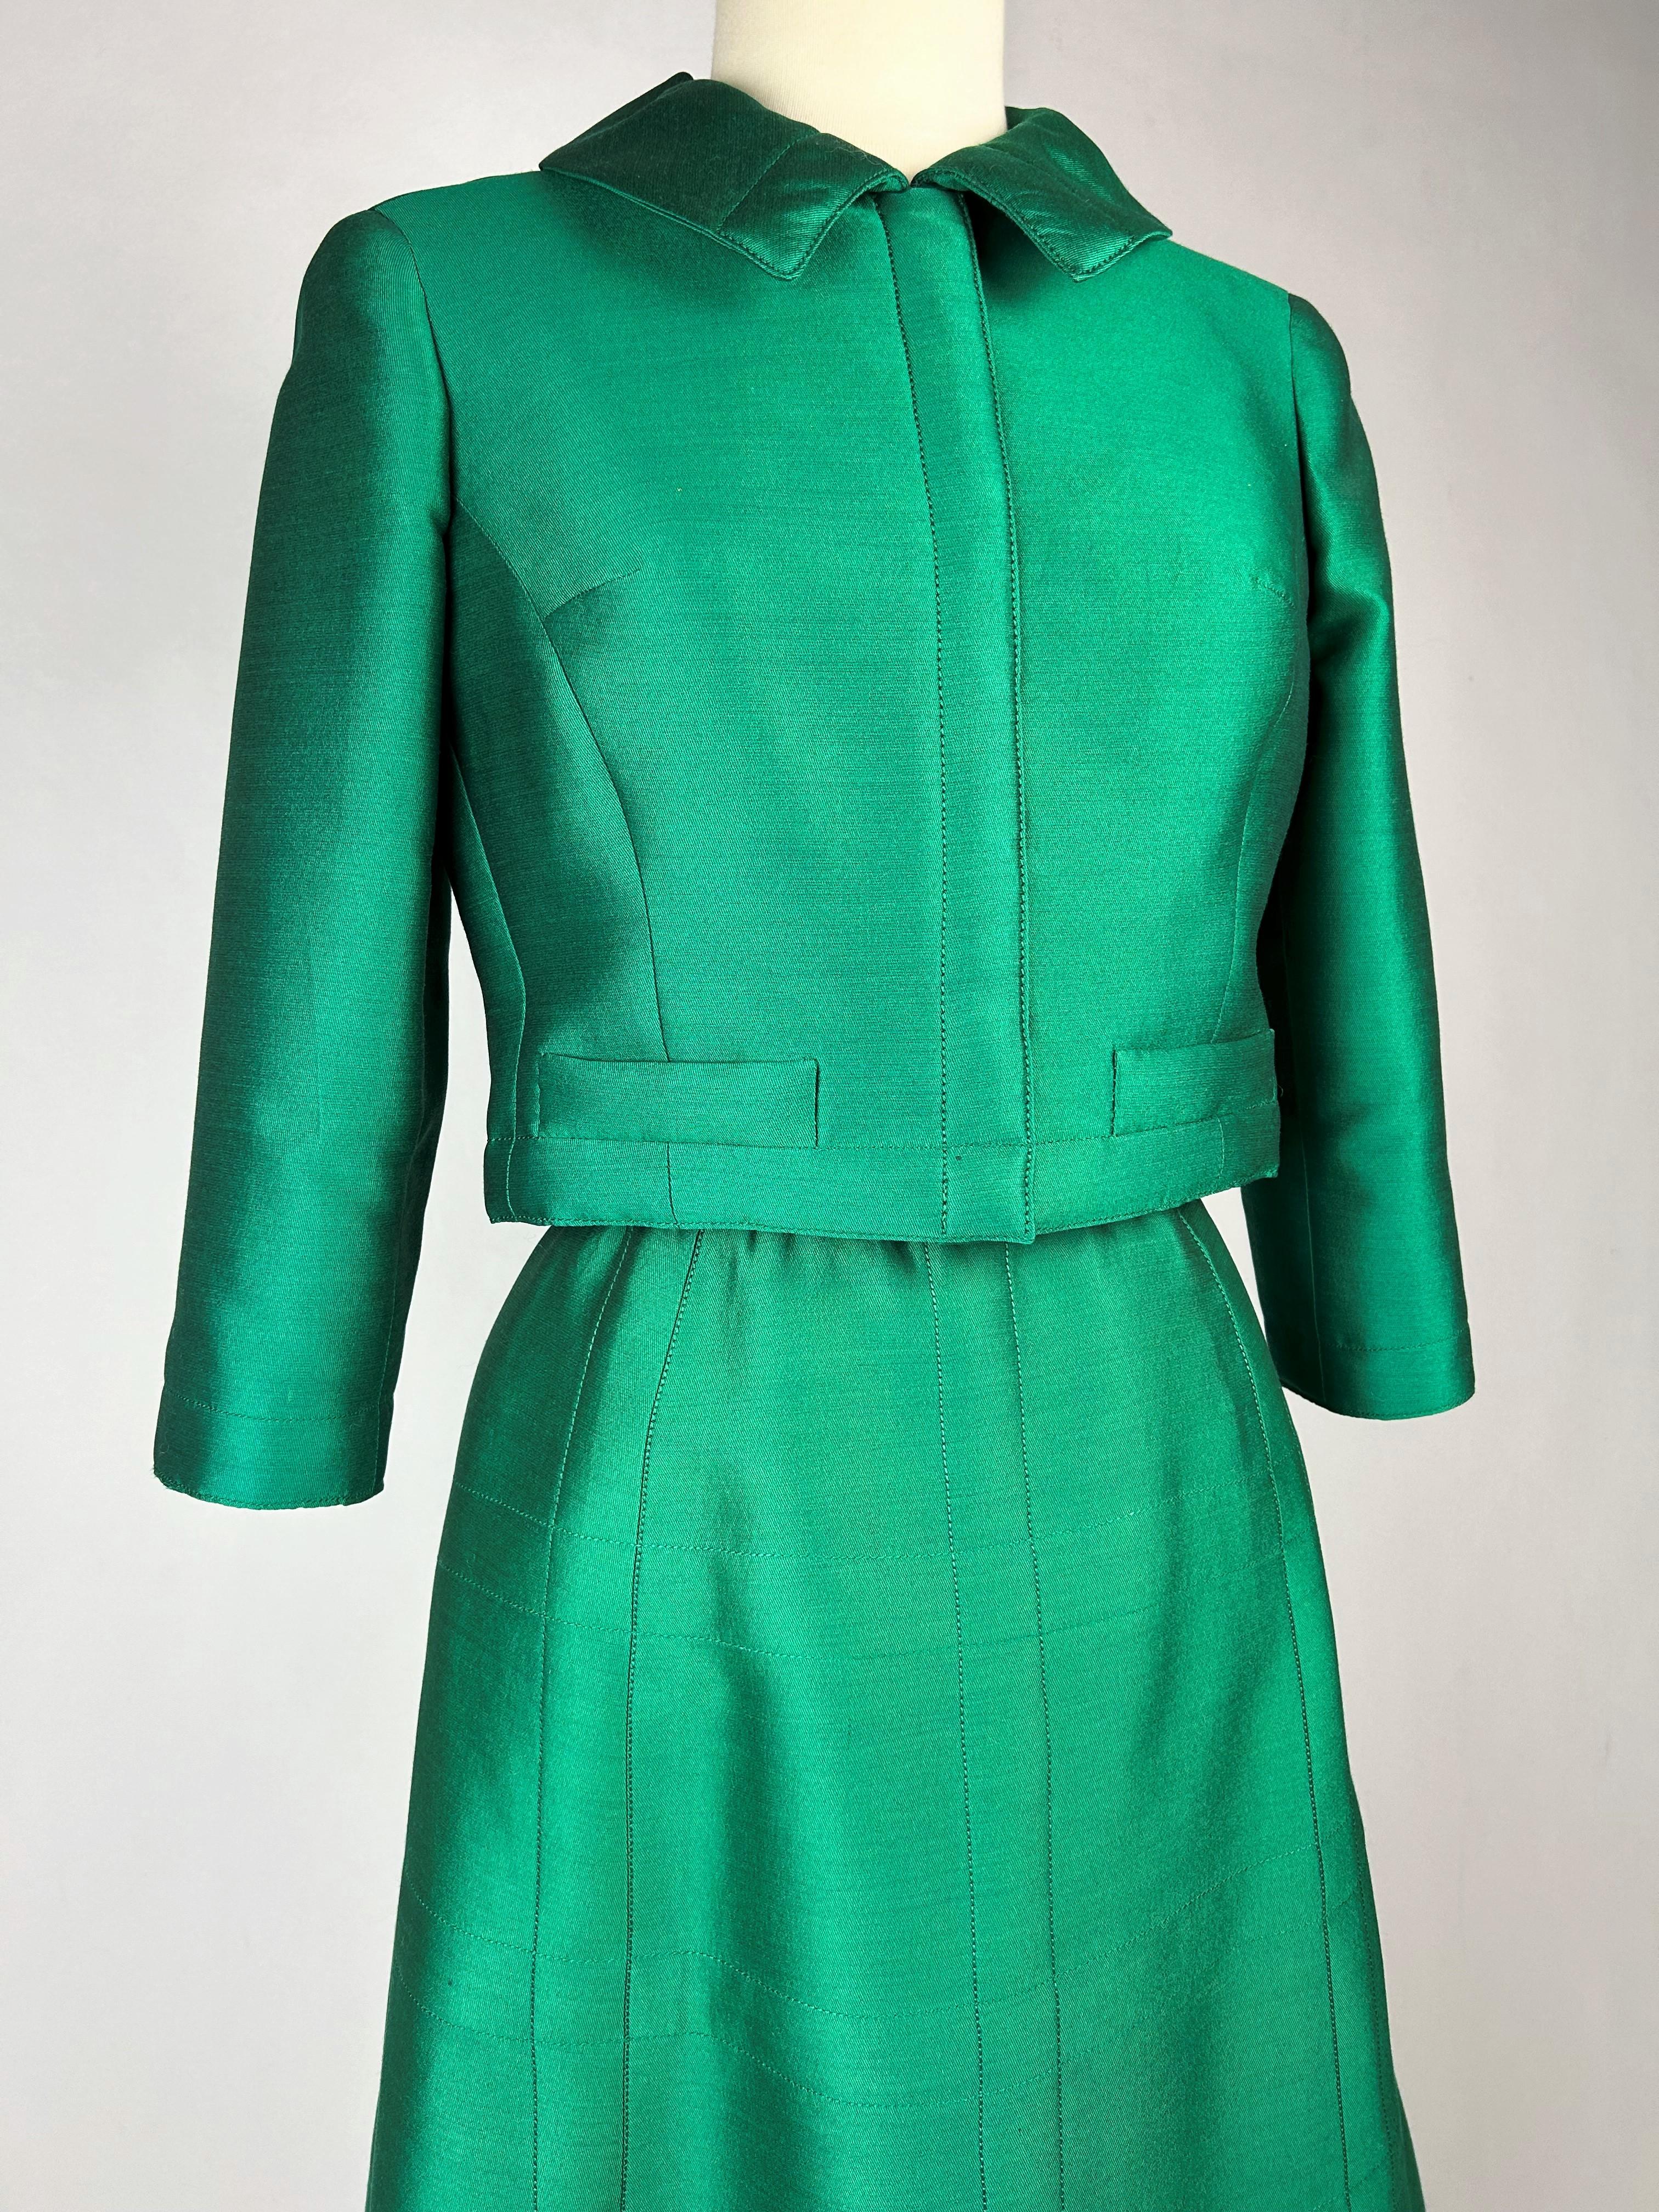 An Emerald Gazar Demi-Couture Skirt Suit by Louis Féraud Circa 1968-1972 For Sale 5